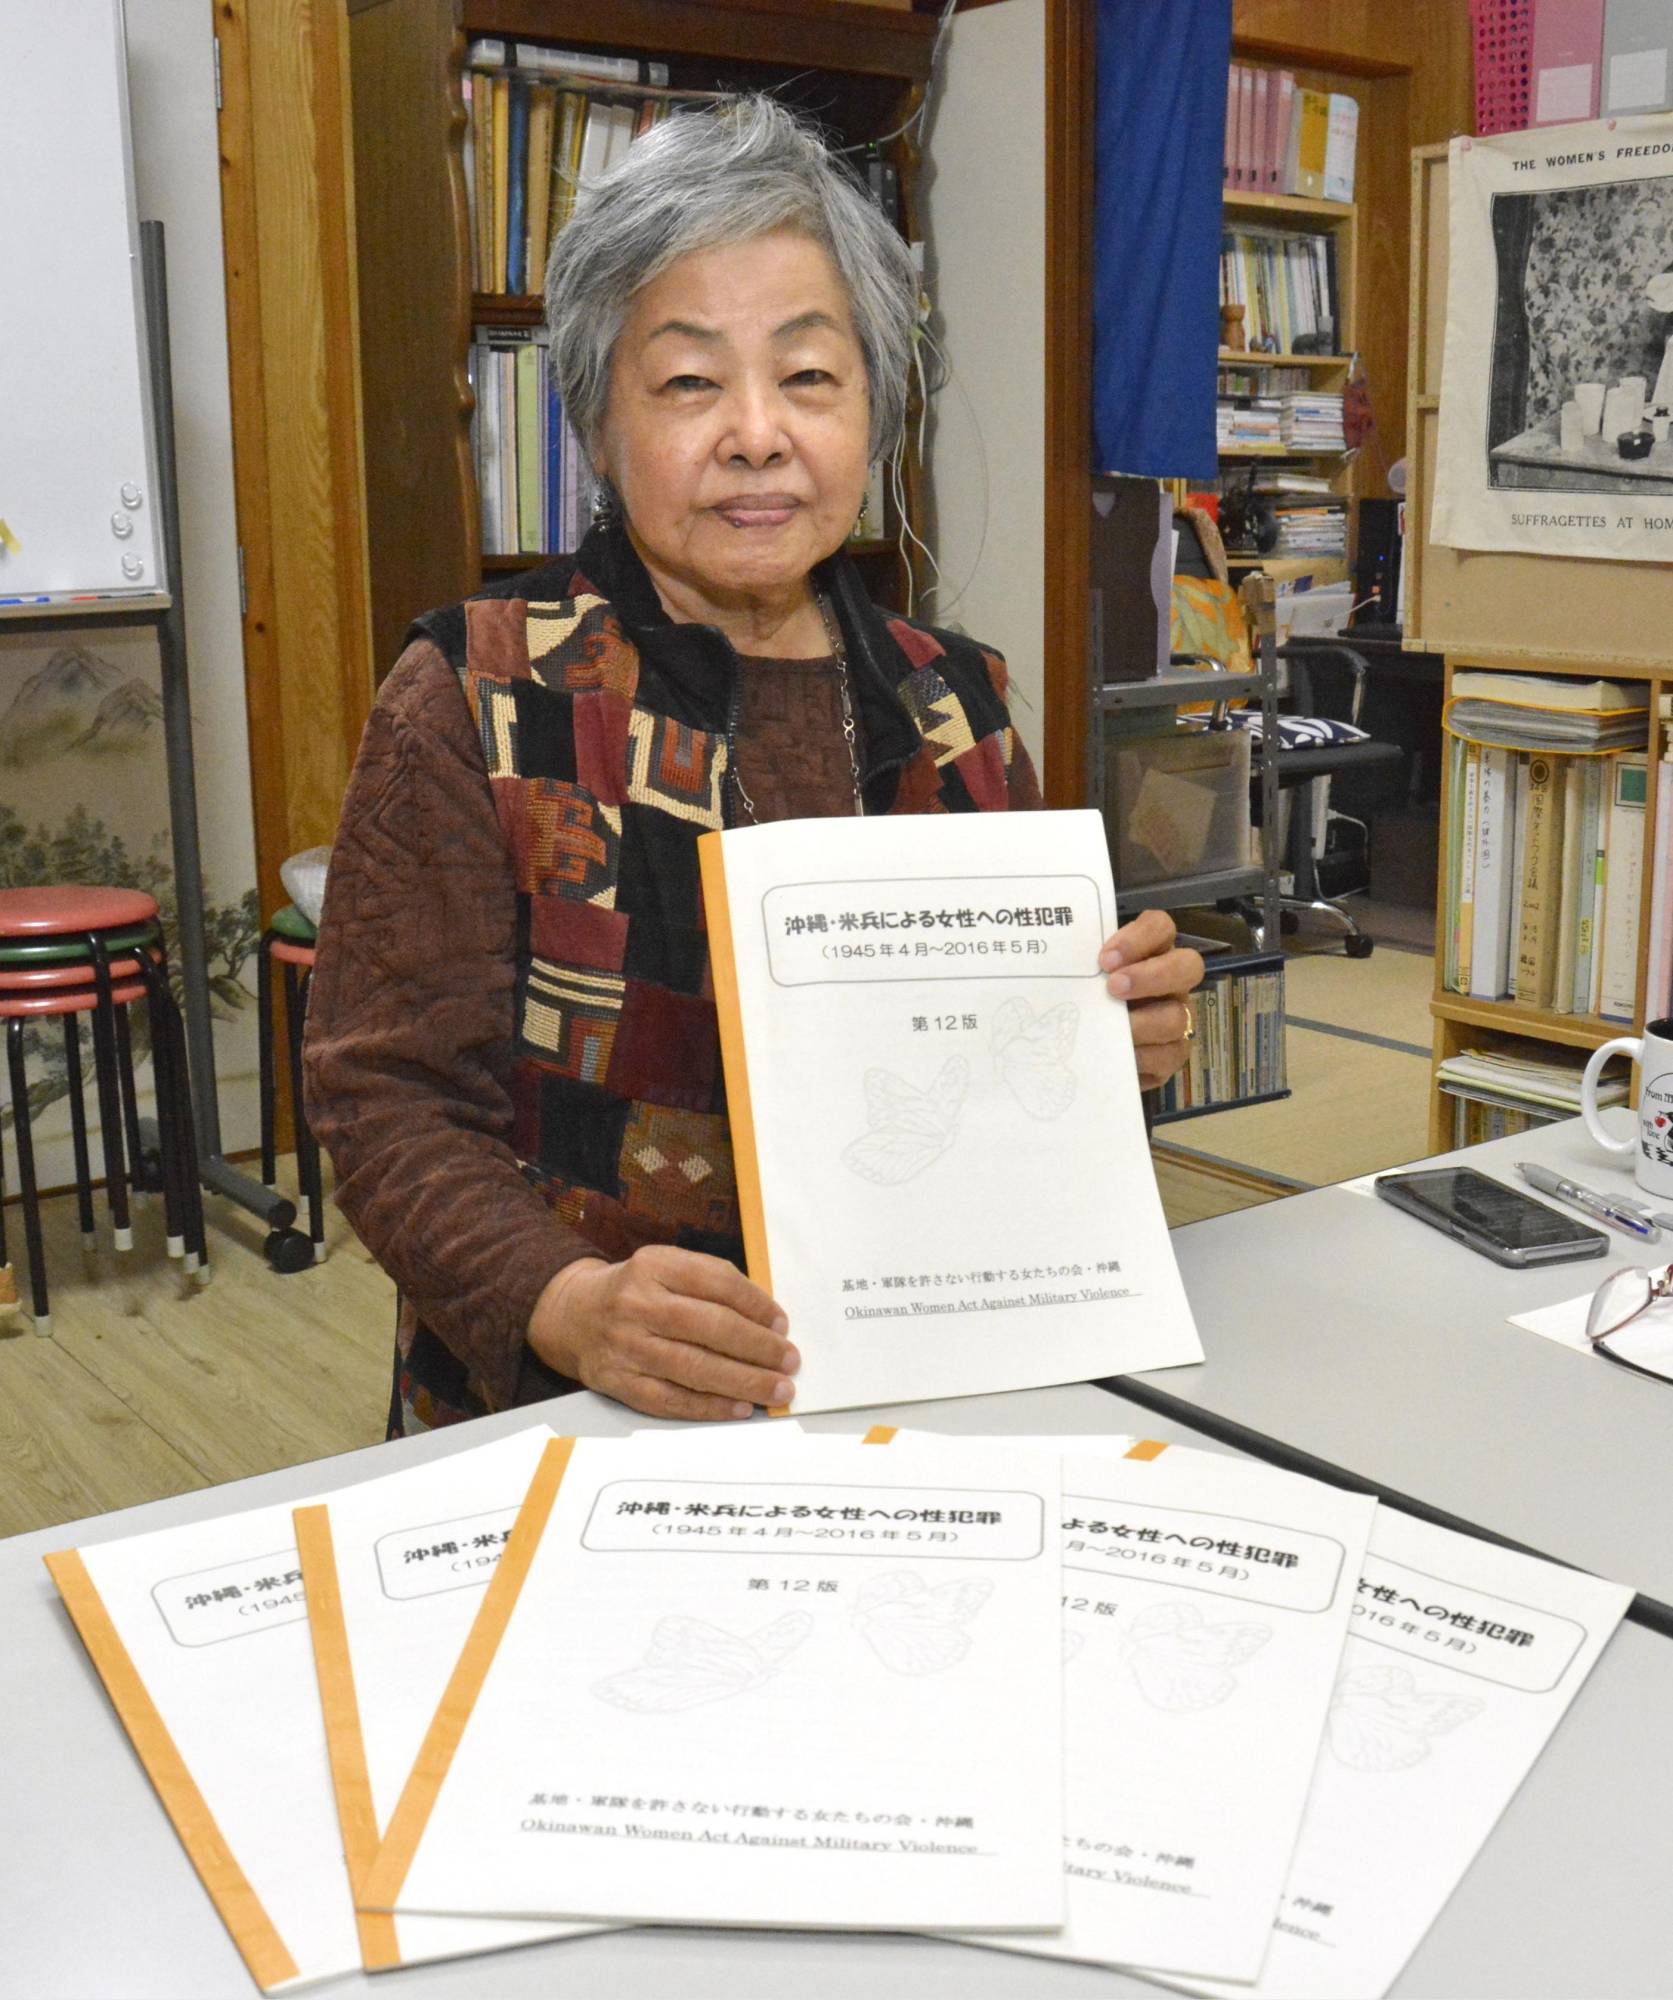 Okinawan womens civic group chronicles sex crimes by image